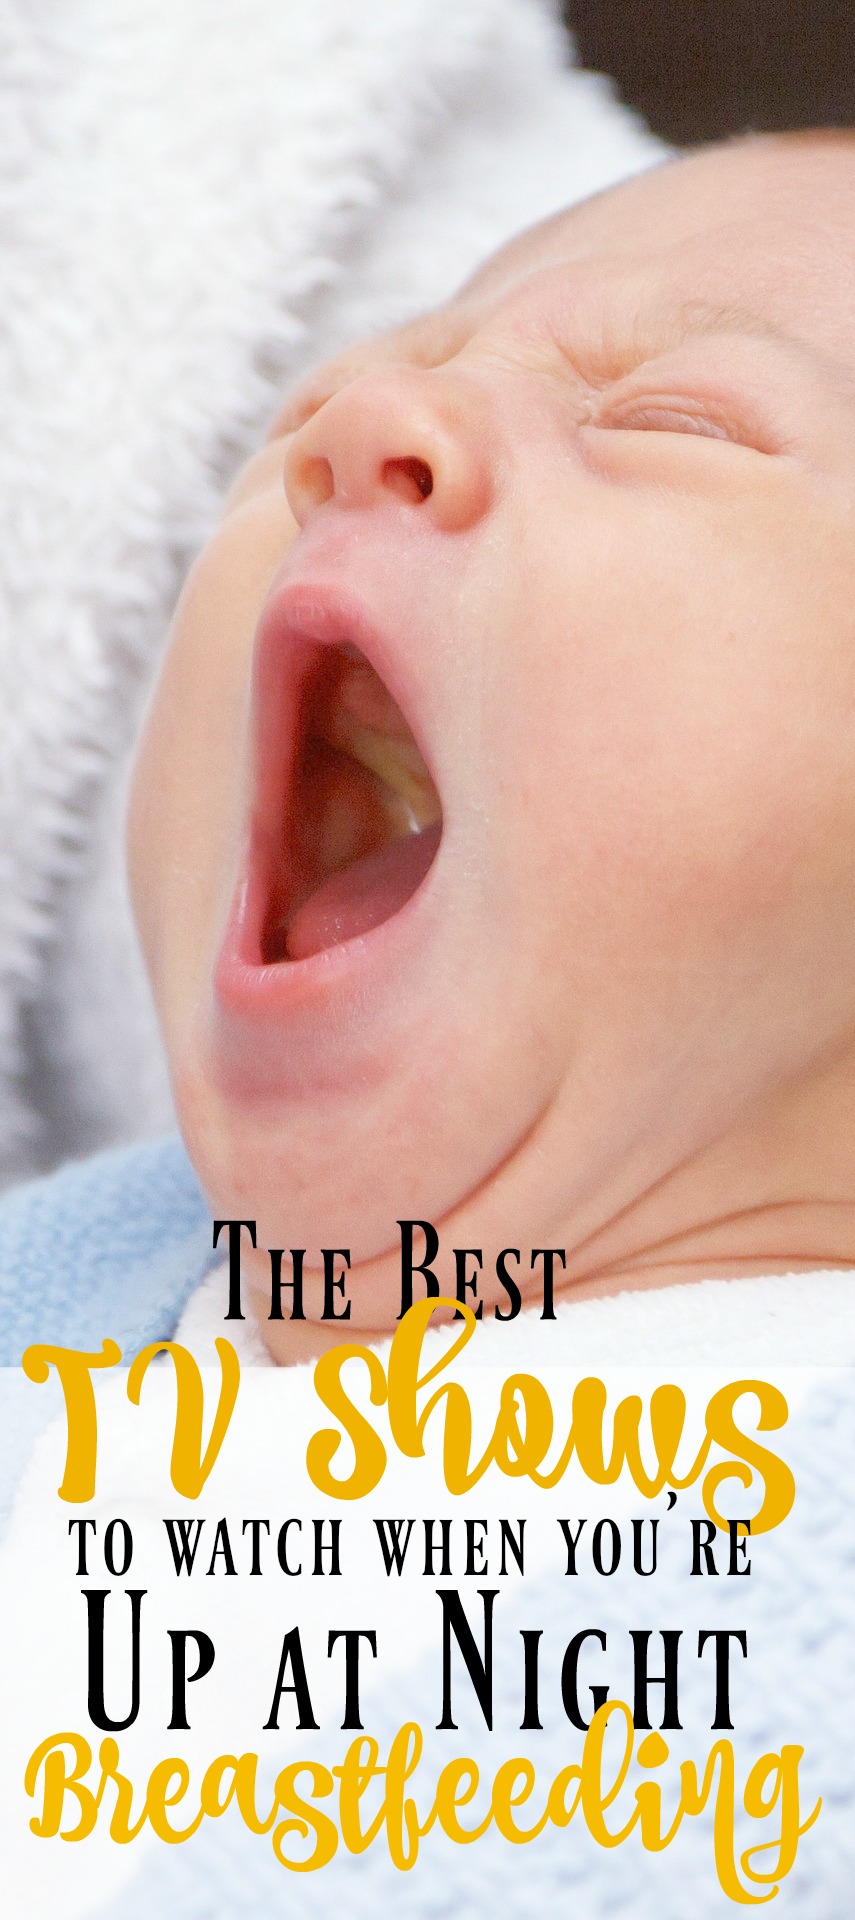 If you're trying to figure out what to watch while breastfeeding, this list is for you!